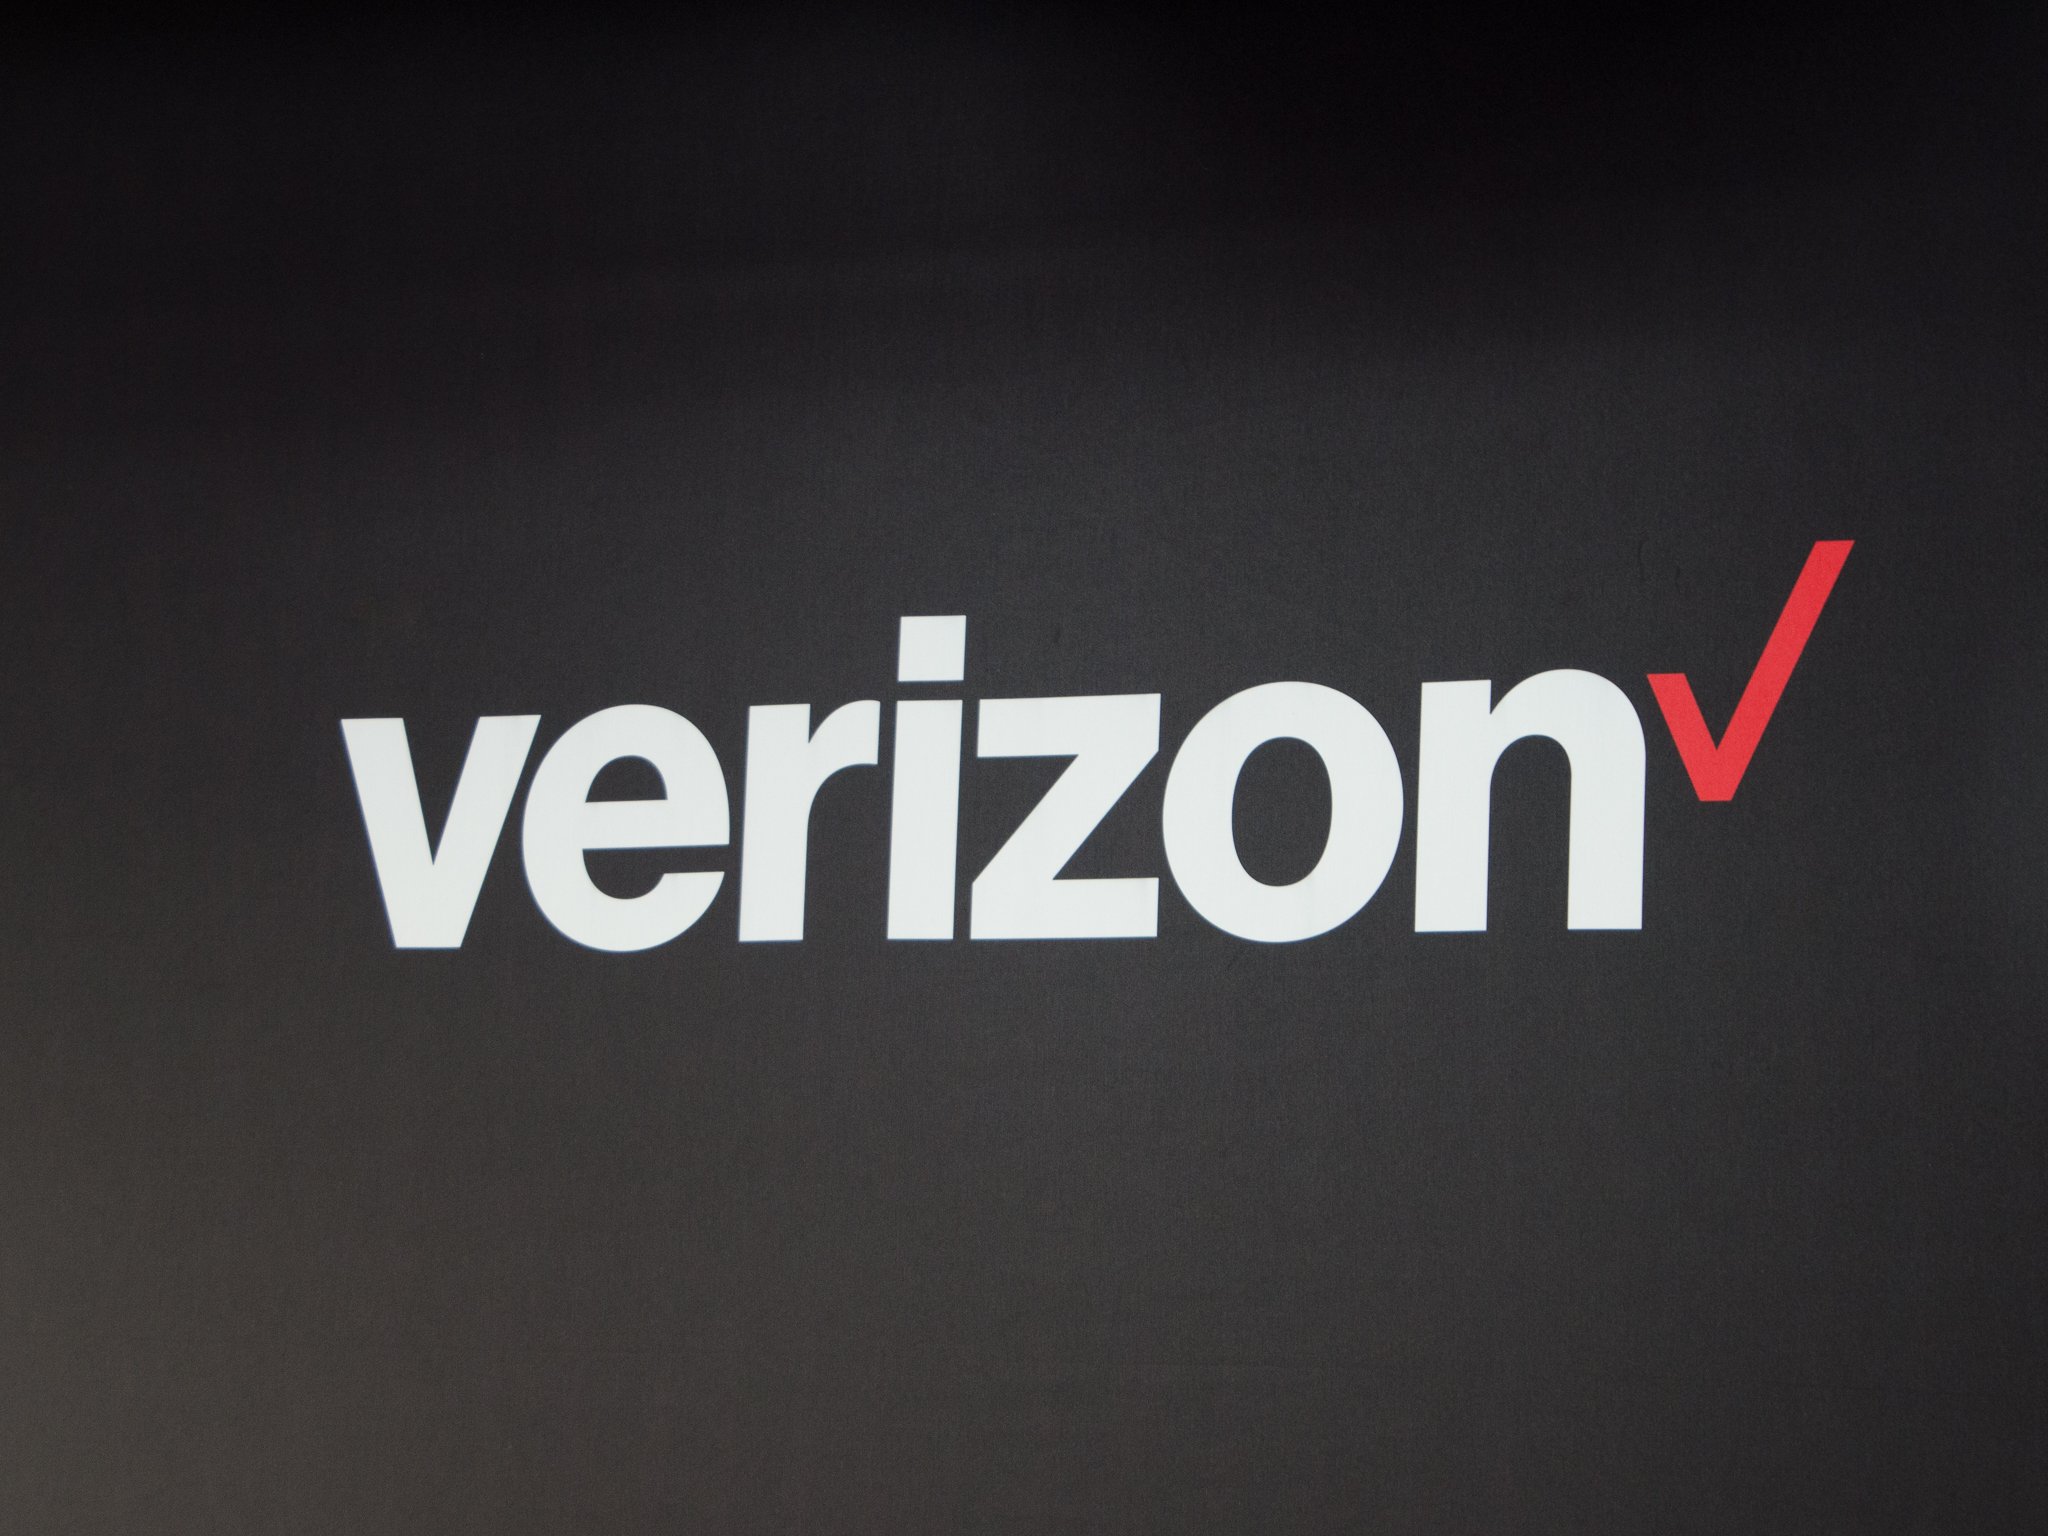 https://www.androidcentral.com/sites/androidcentral.com/files/styles/larger_wm_brw/public/article_images/2015/10/verizon-logo-black-background.jpg